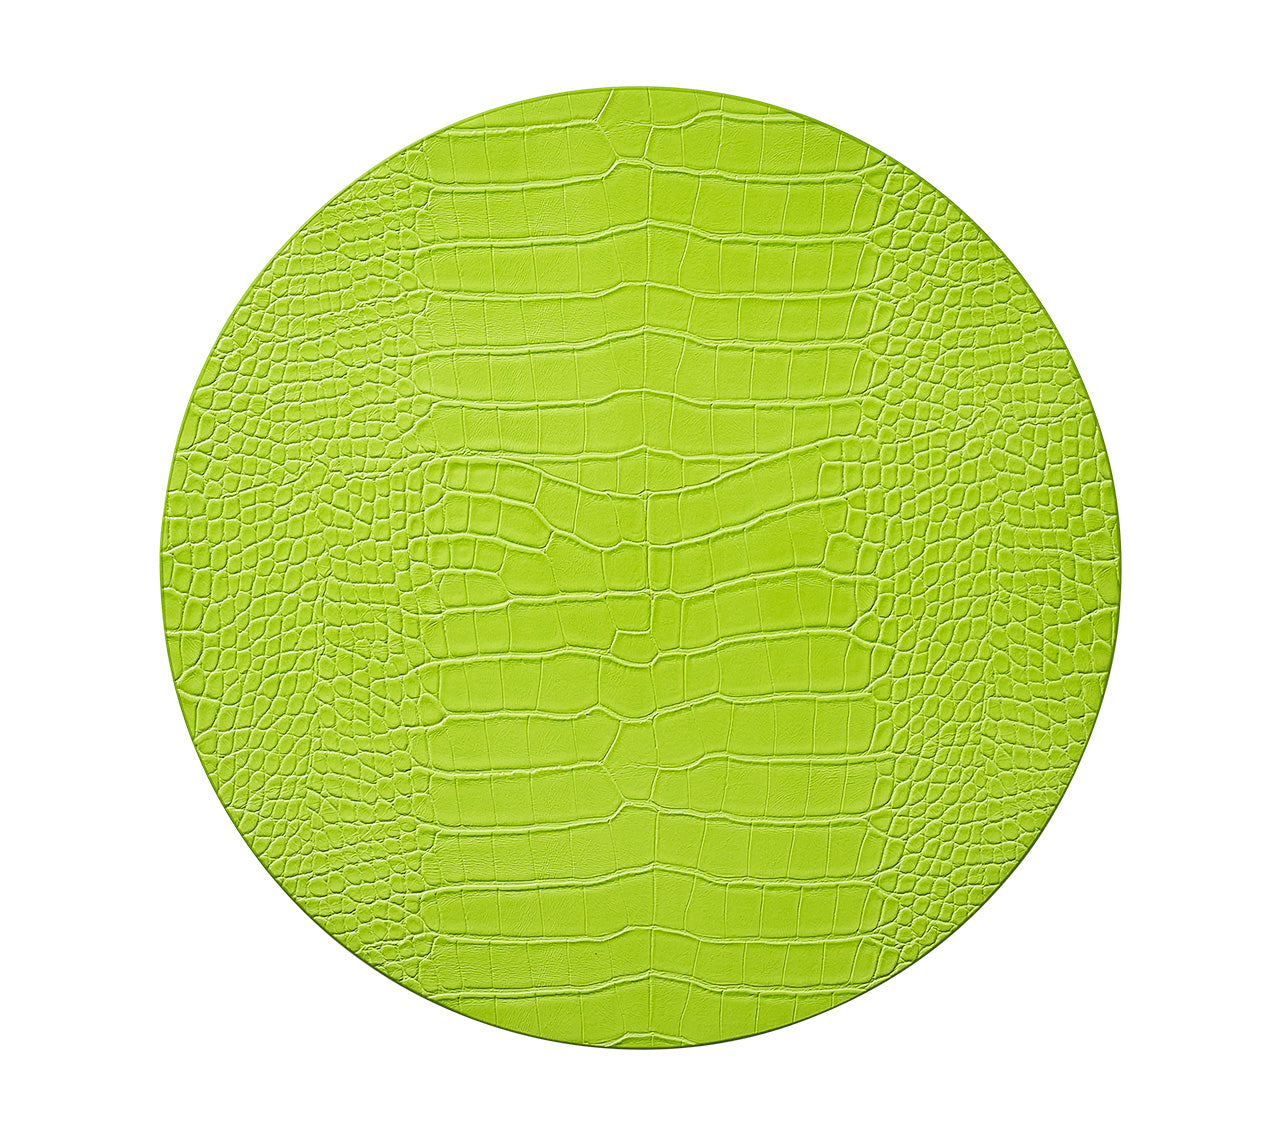 Croco Placemat in Citron, Set of 4